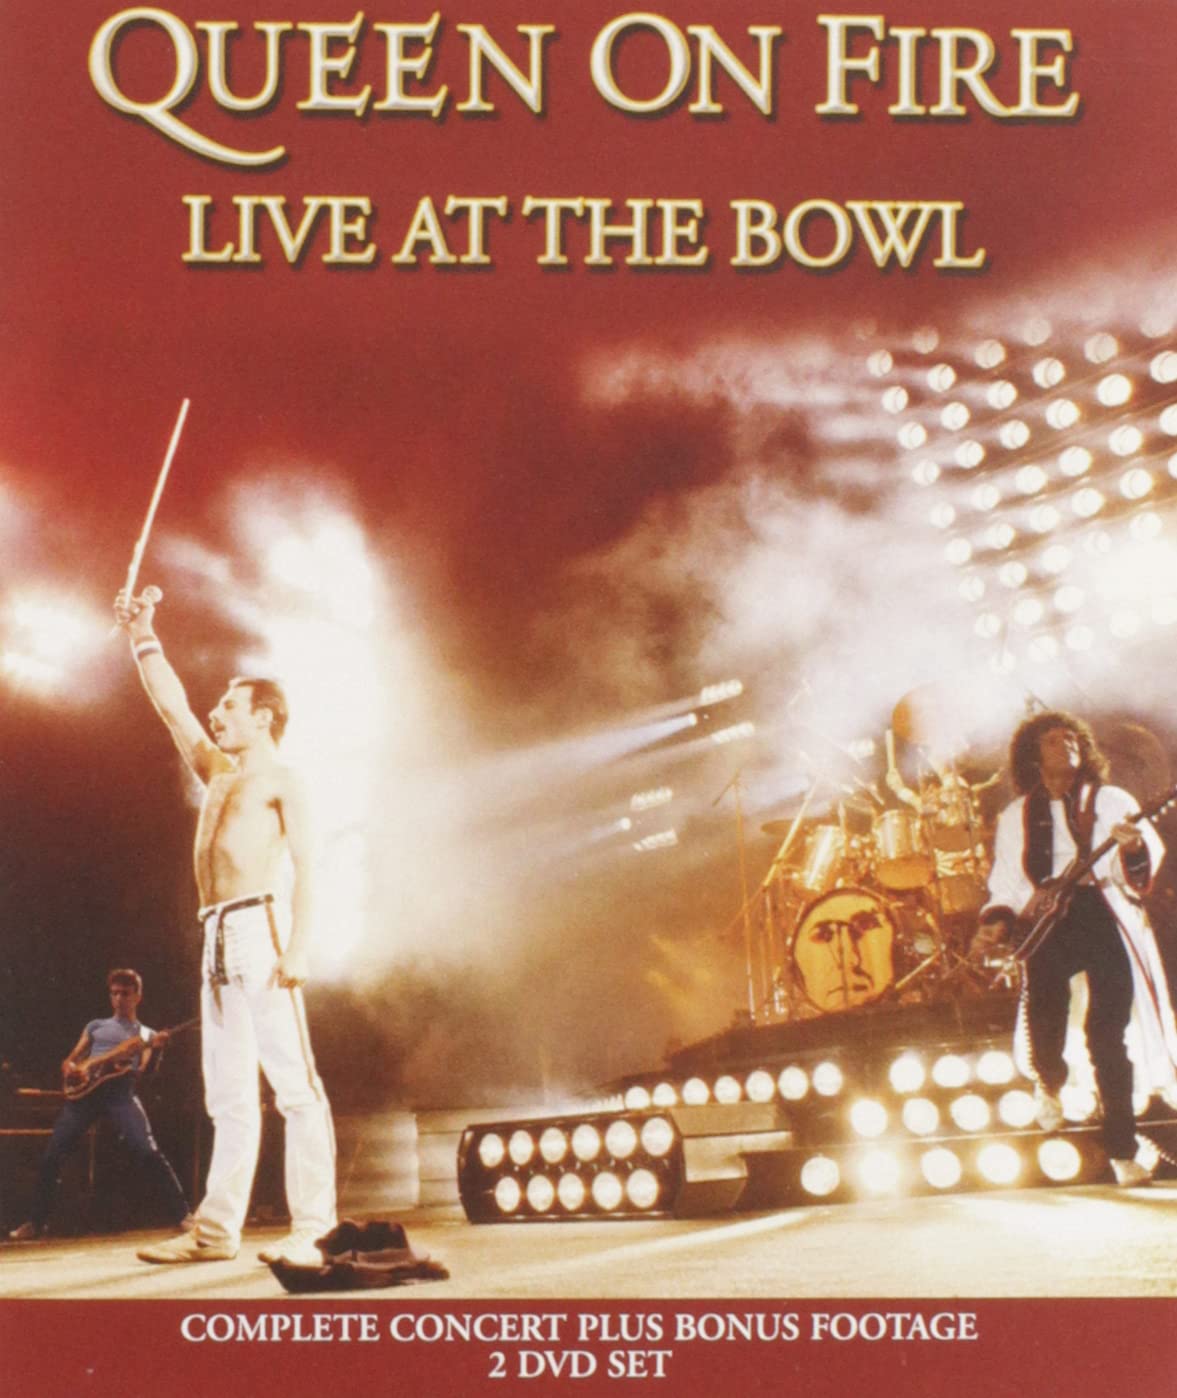 Book Cover On Fire Live at the Bowl